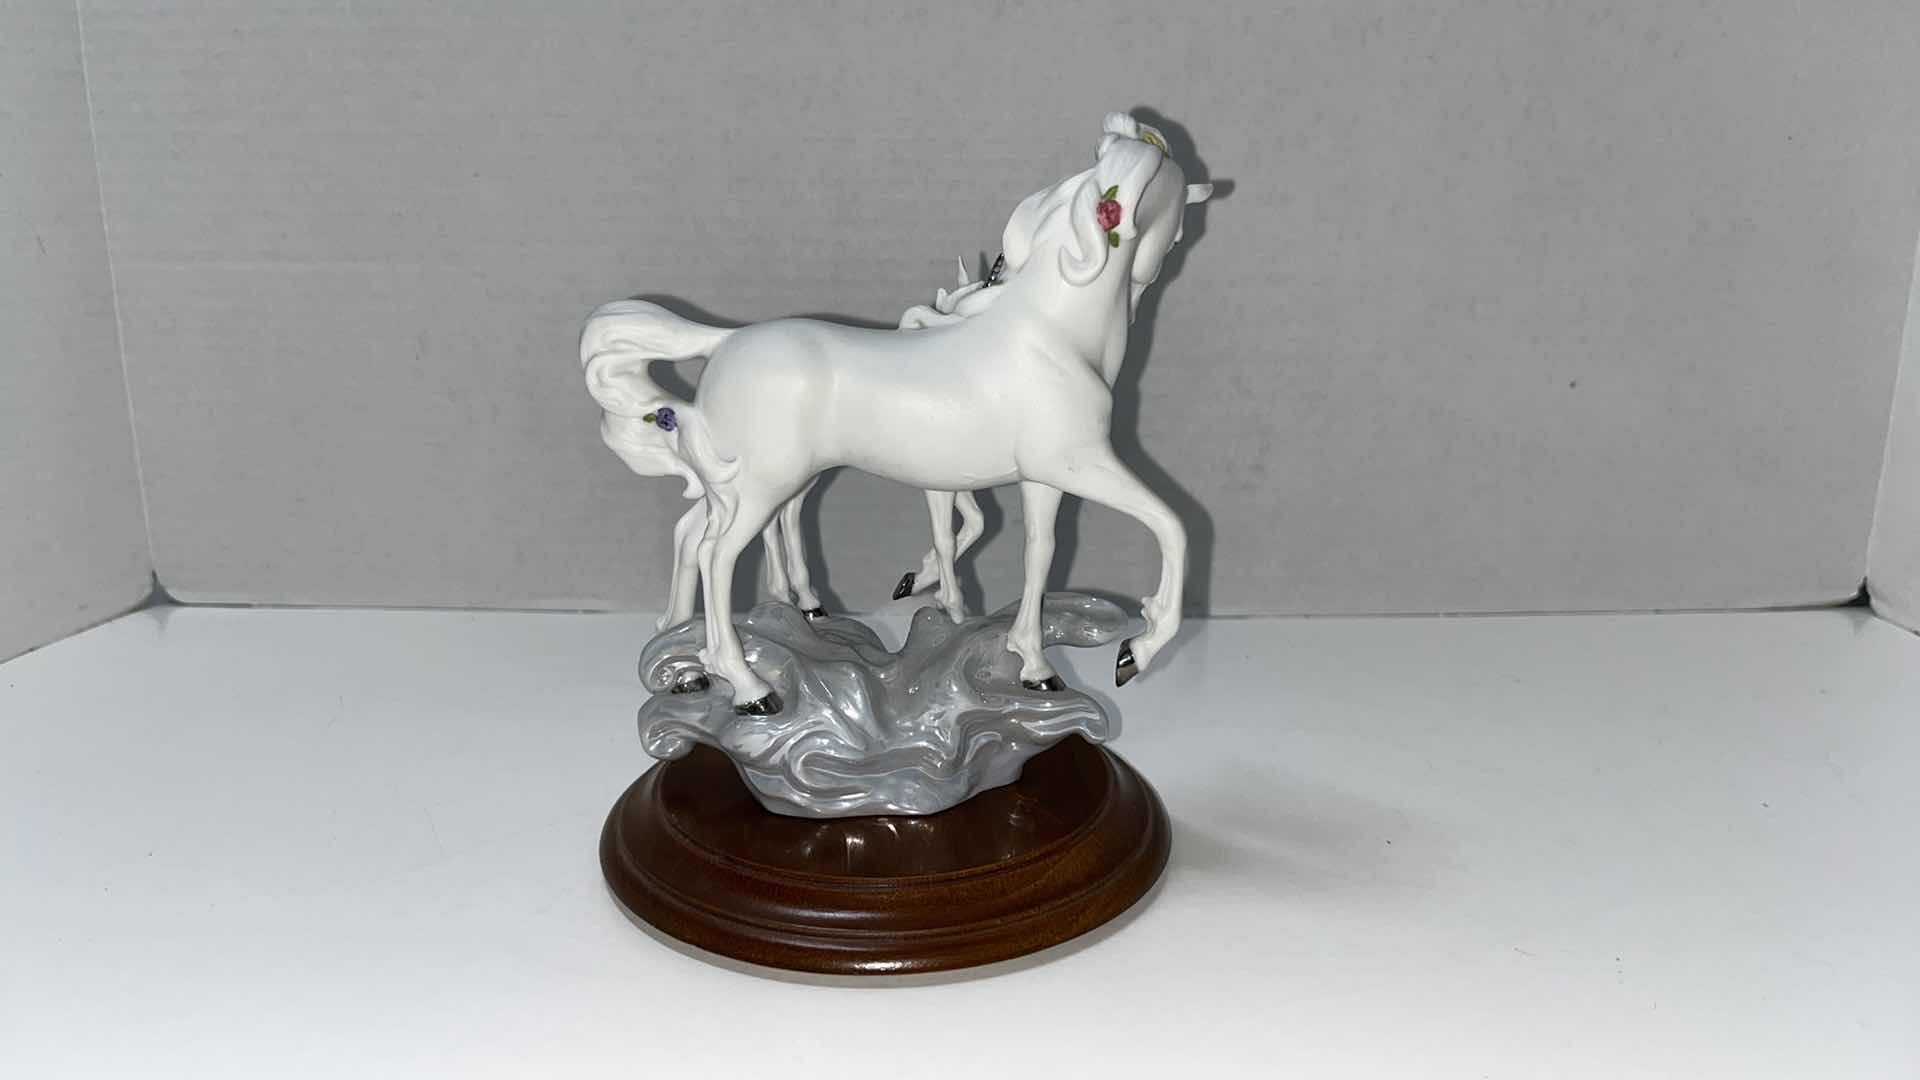 Photo 2 of VINTAGE HALLMARK MAGICAL UNICORN COLLECTION “LOVES REFLECTION” SCULPTED BY DUANE UNRUH, 1988